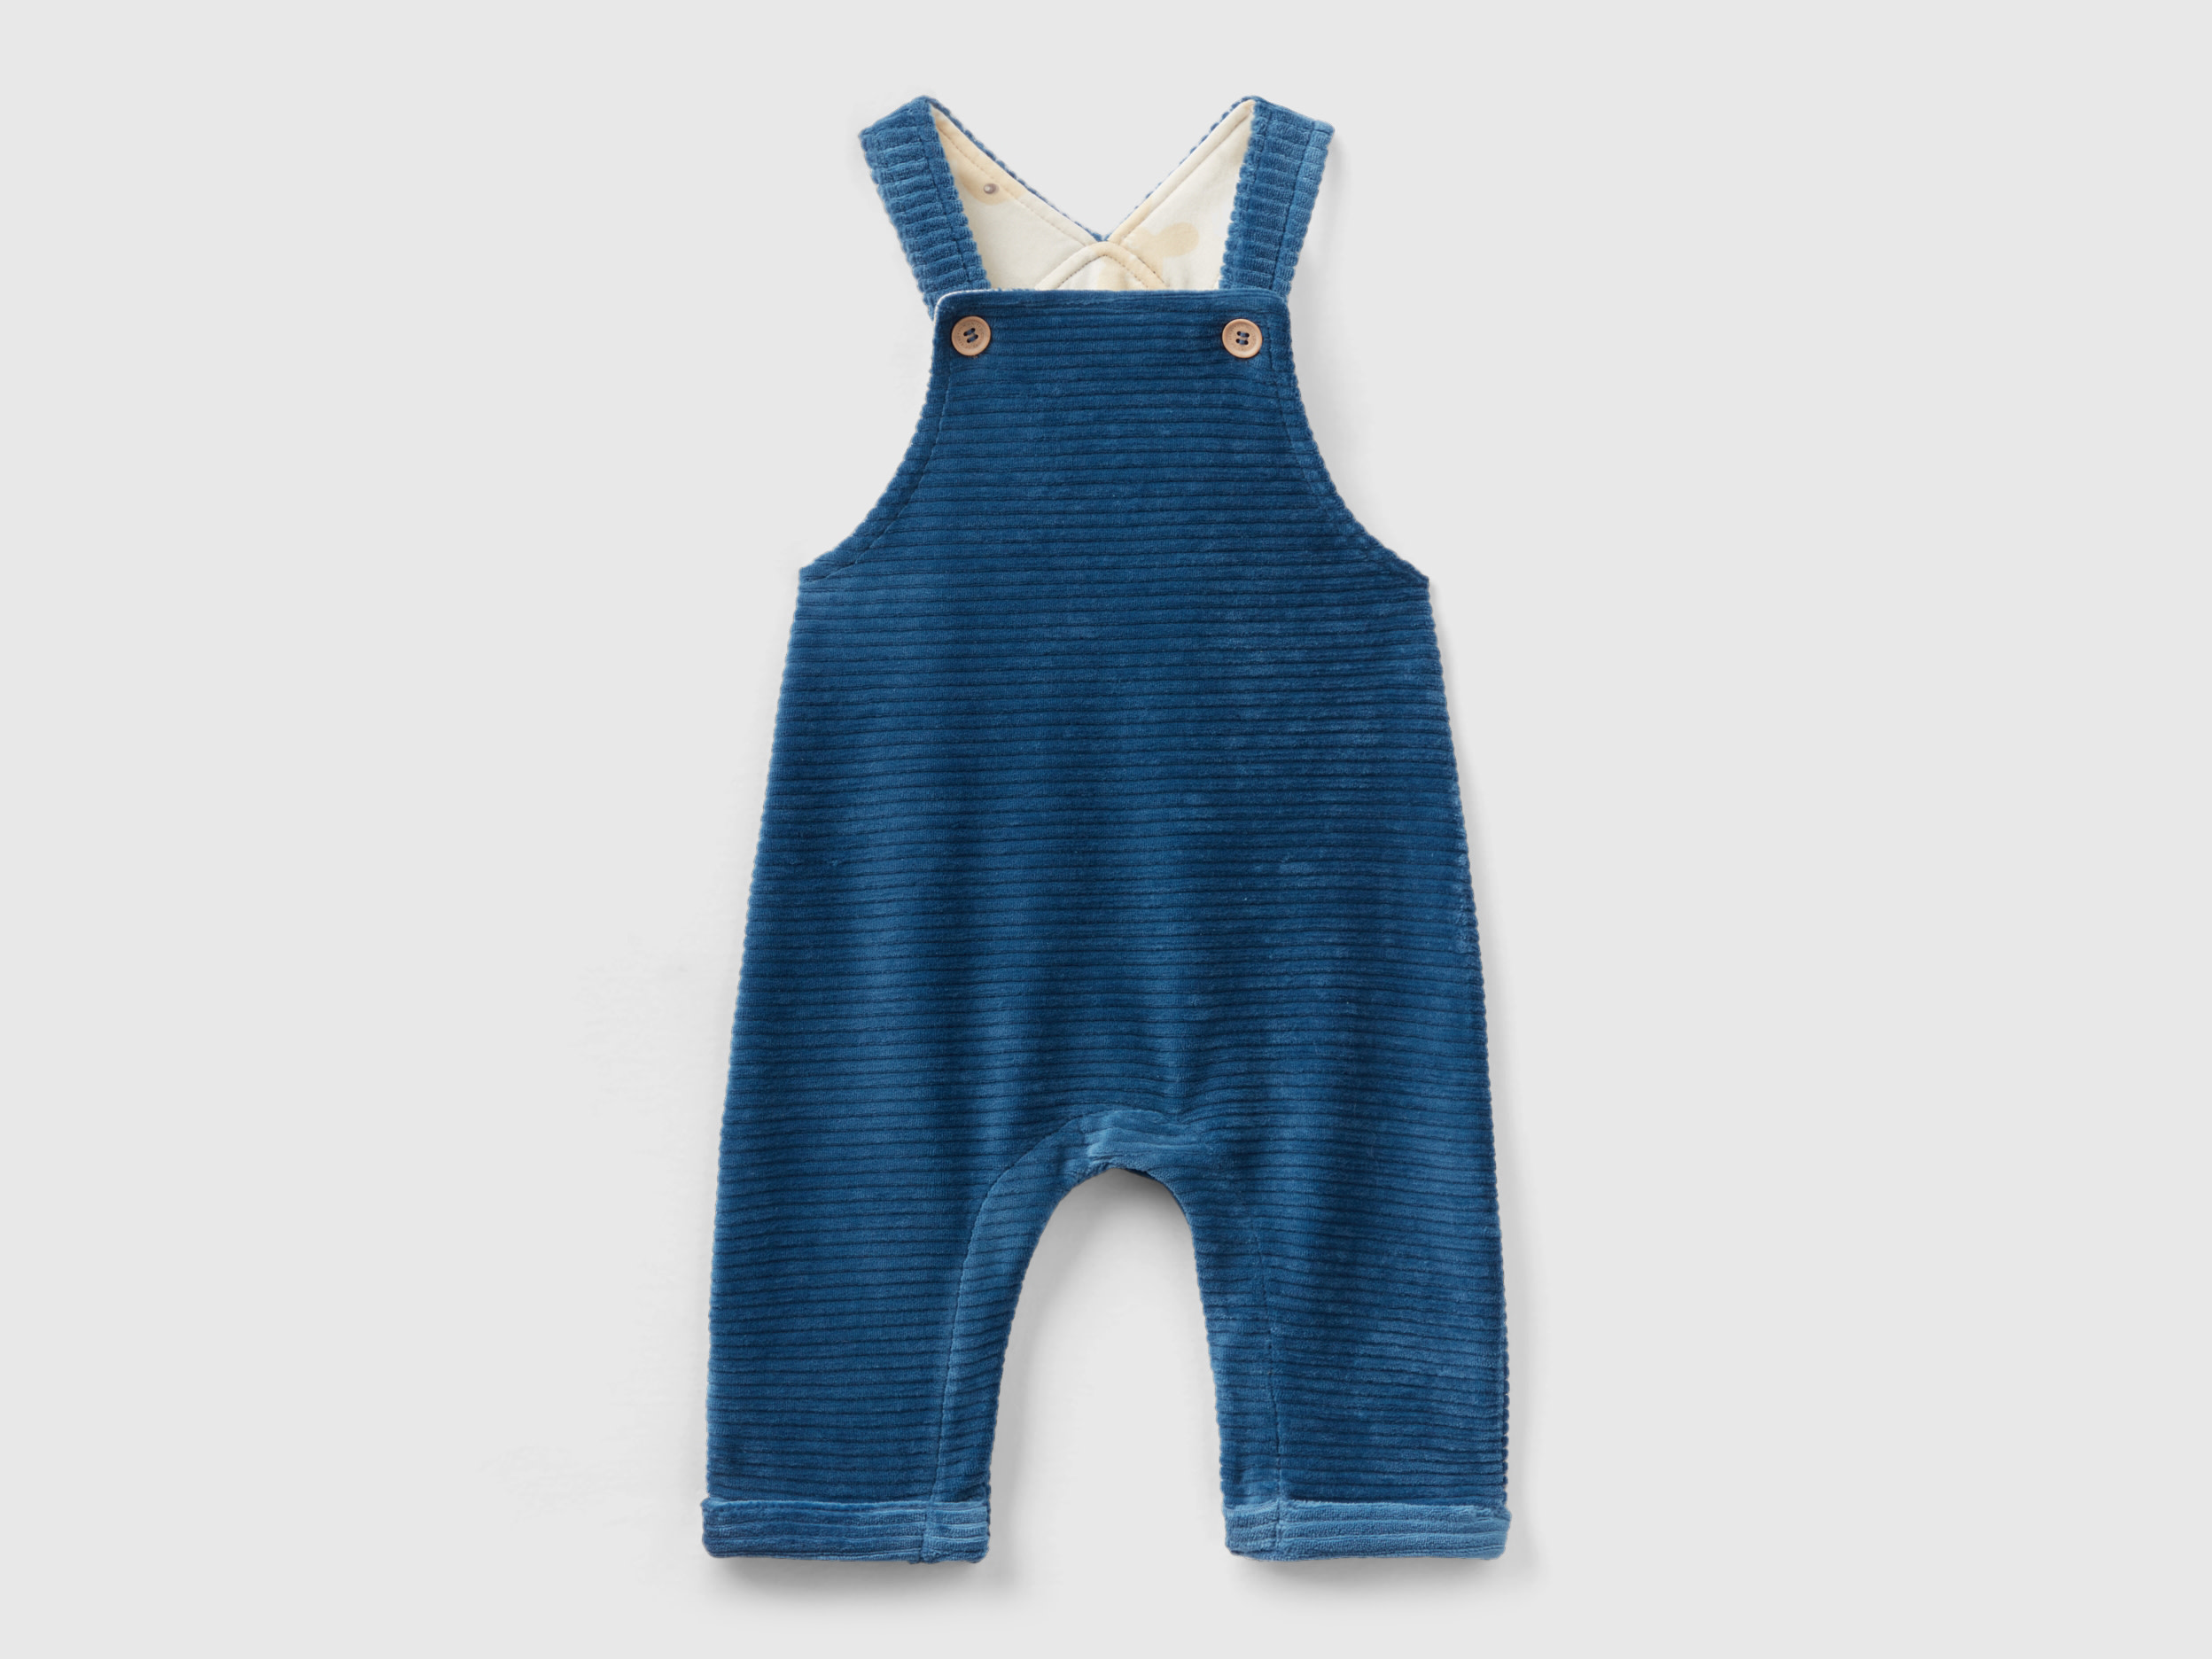 Benetton, Dungarees In Chenille, size 3-6, Air Force Blue, Kids